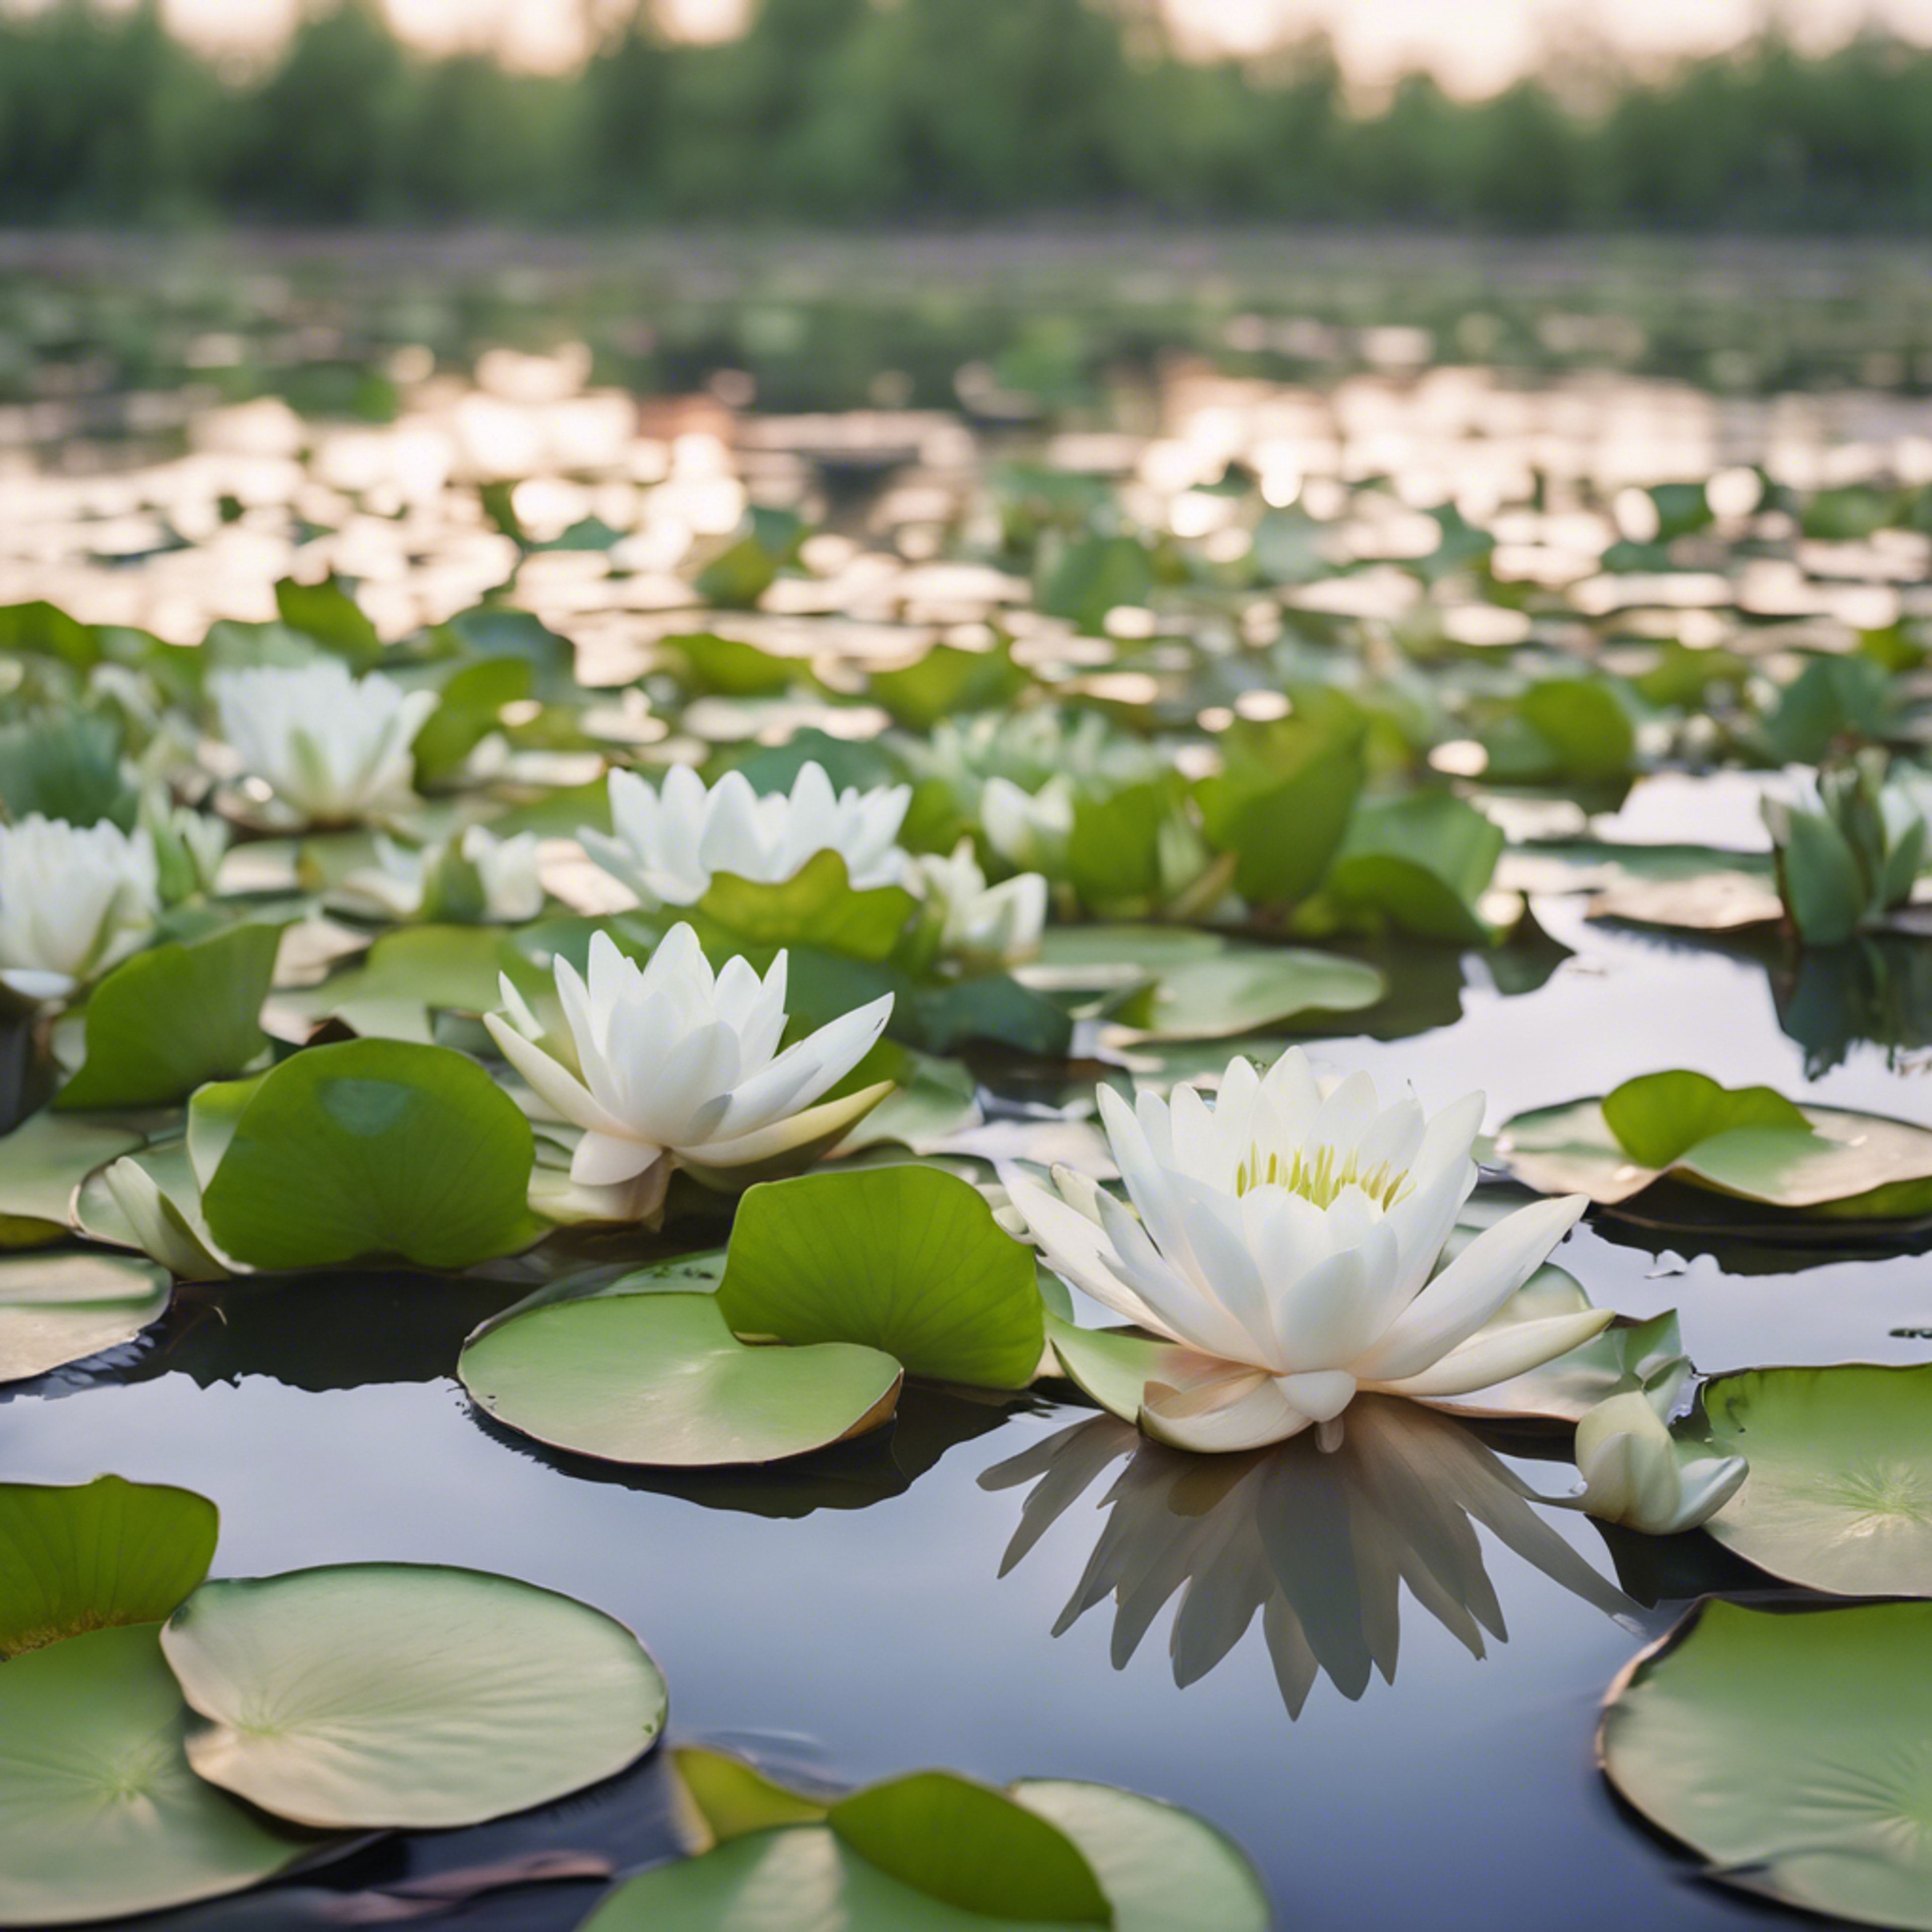 A tranquil lily pond with light green lily pads and budding flowers. Тапет[e3bf8ad191934de7ab8c]